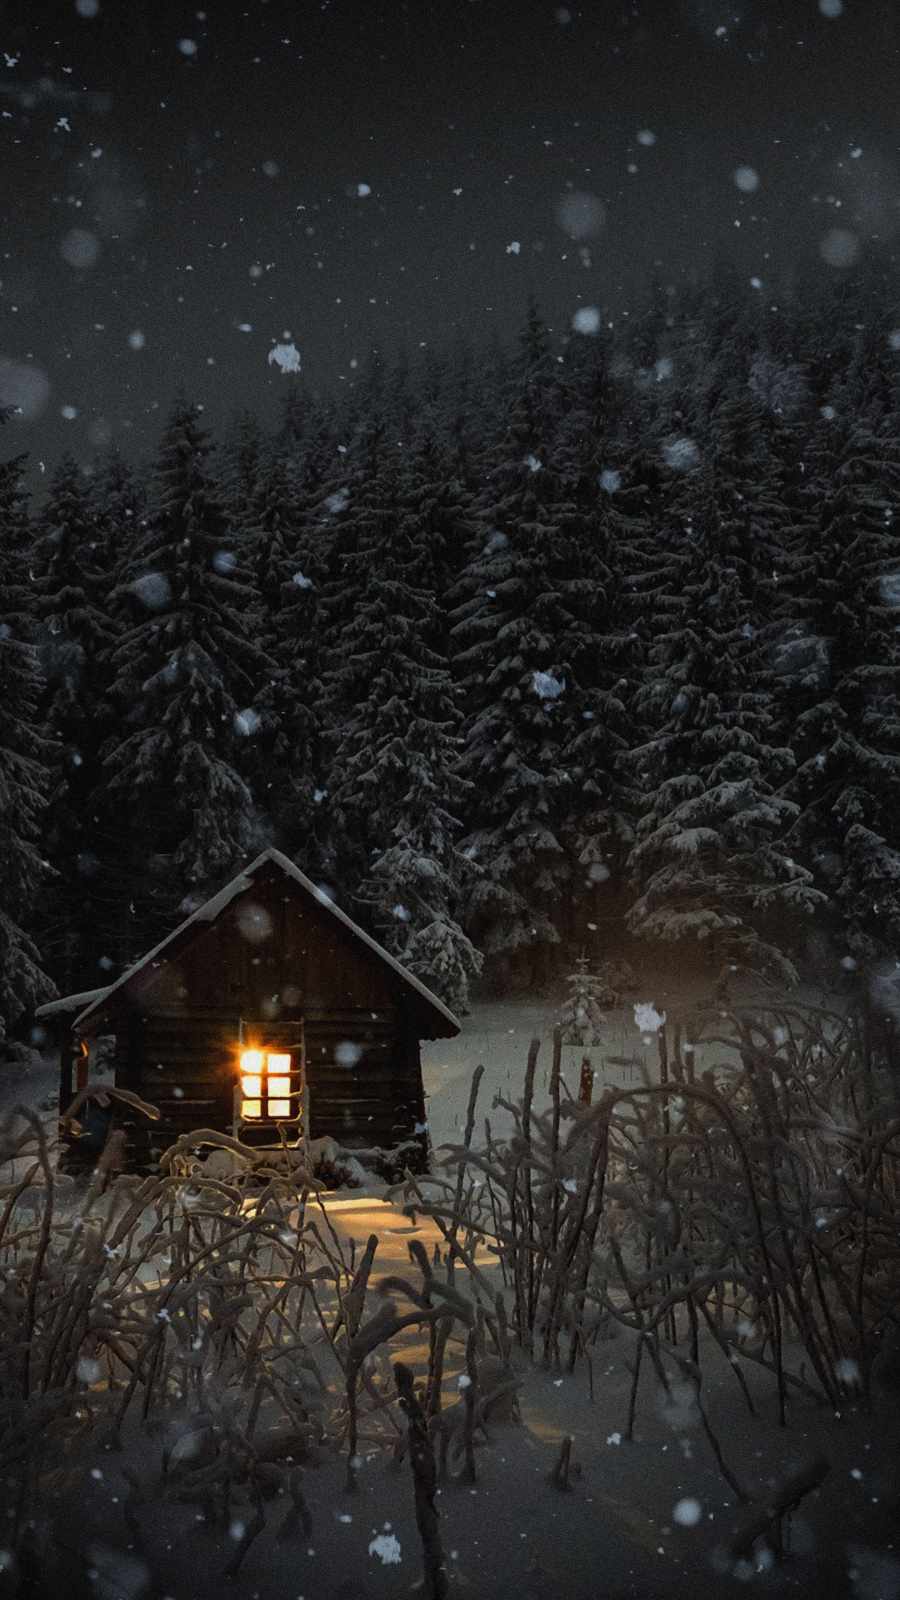 Winter Snow House IPhone Wallpaper   IPhone Wallpapers iPhone